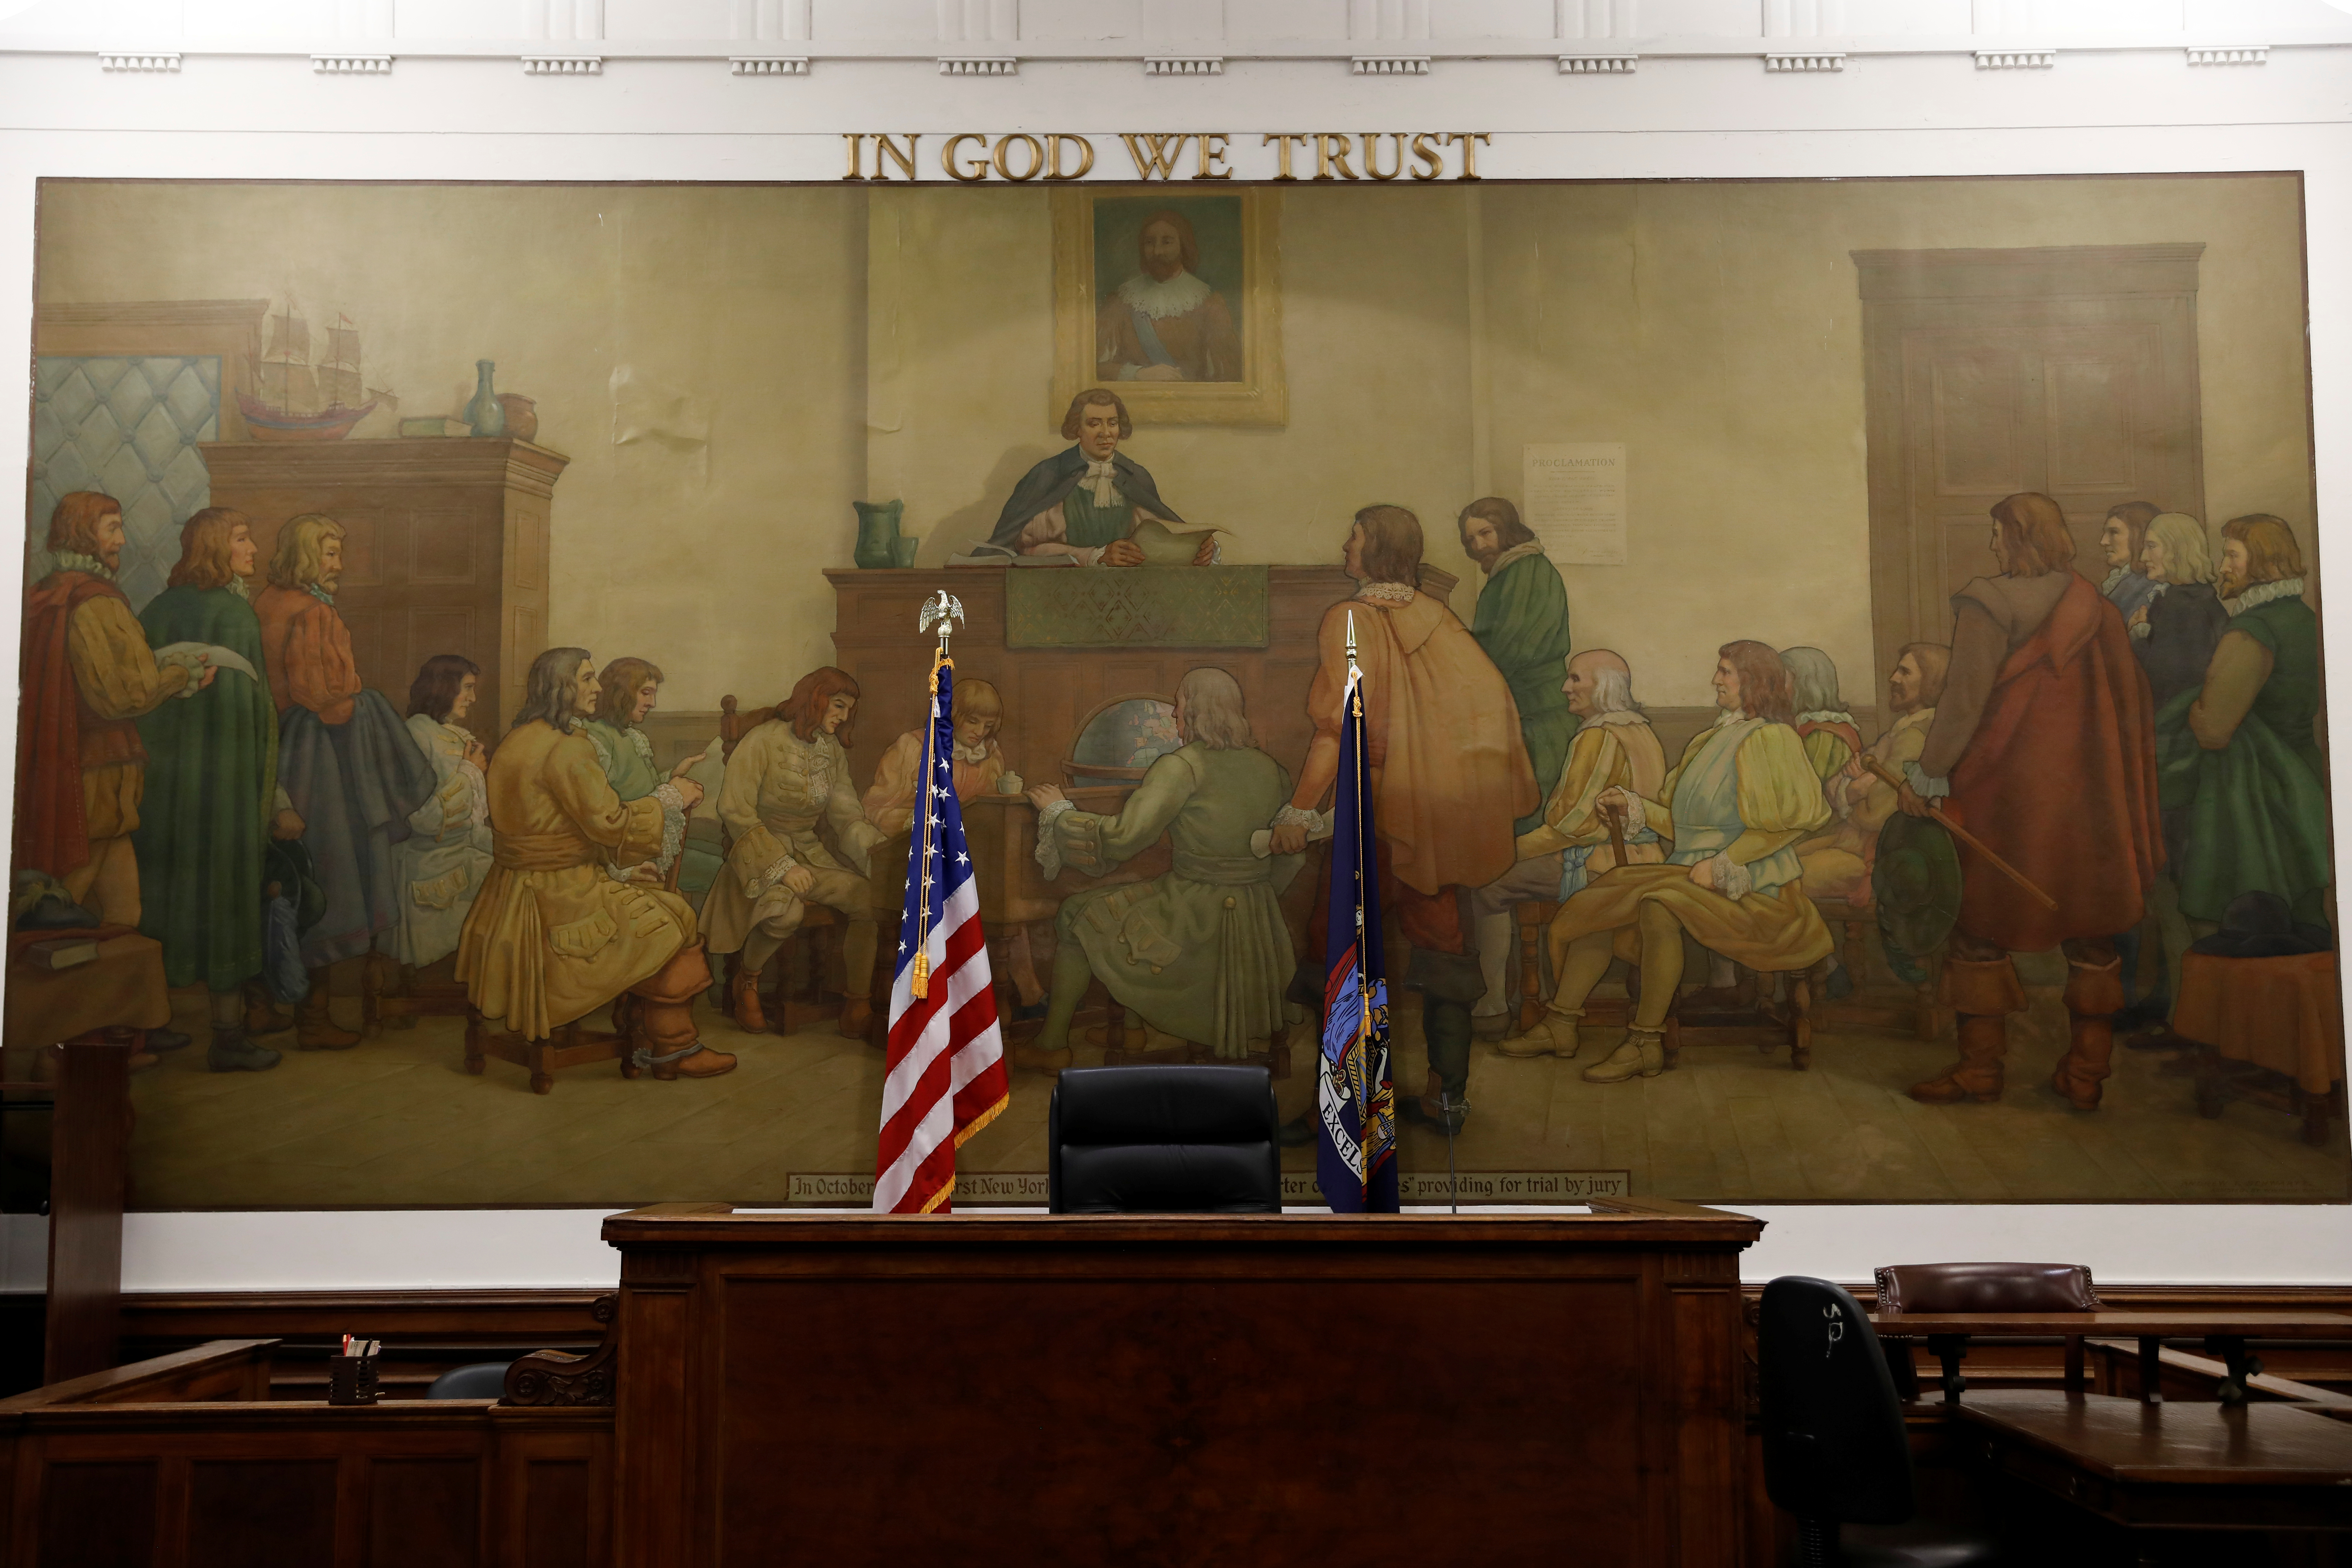 The judge's bench is seen in a court room at the New York State Civil Supreme Court in Manhattan, New York City